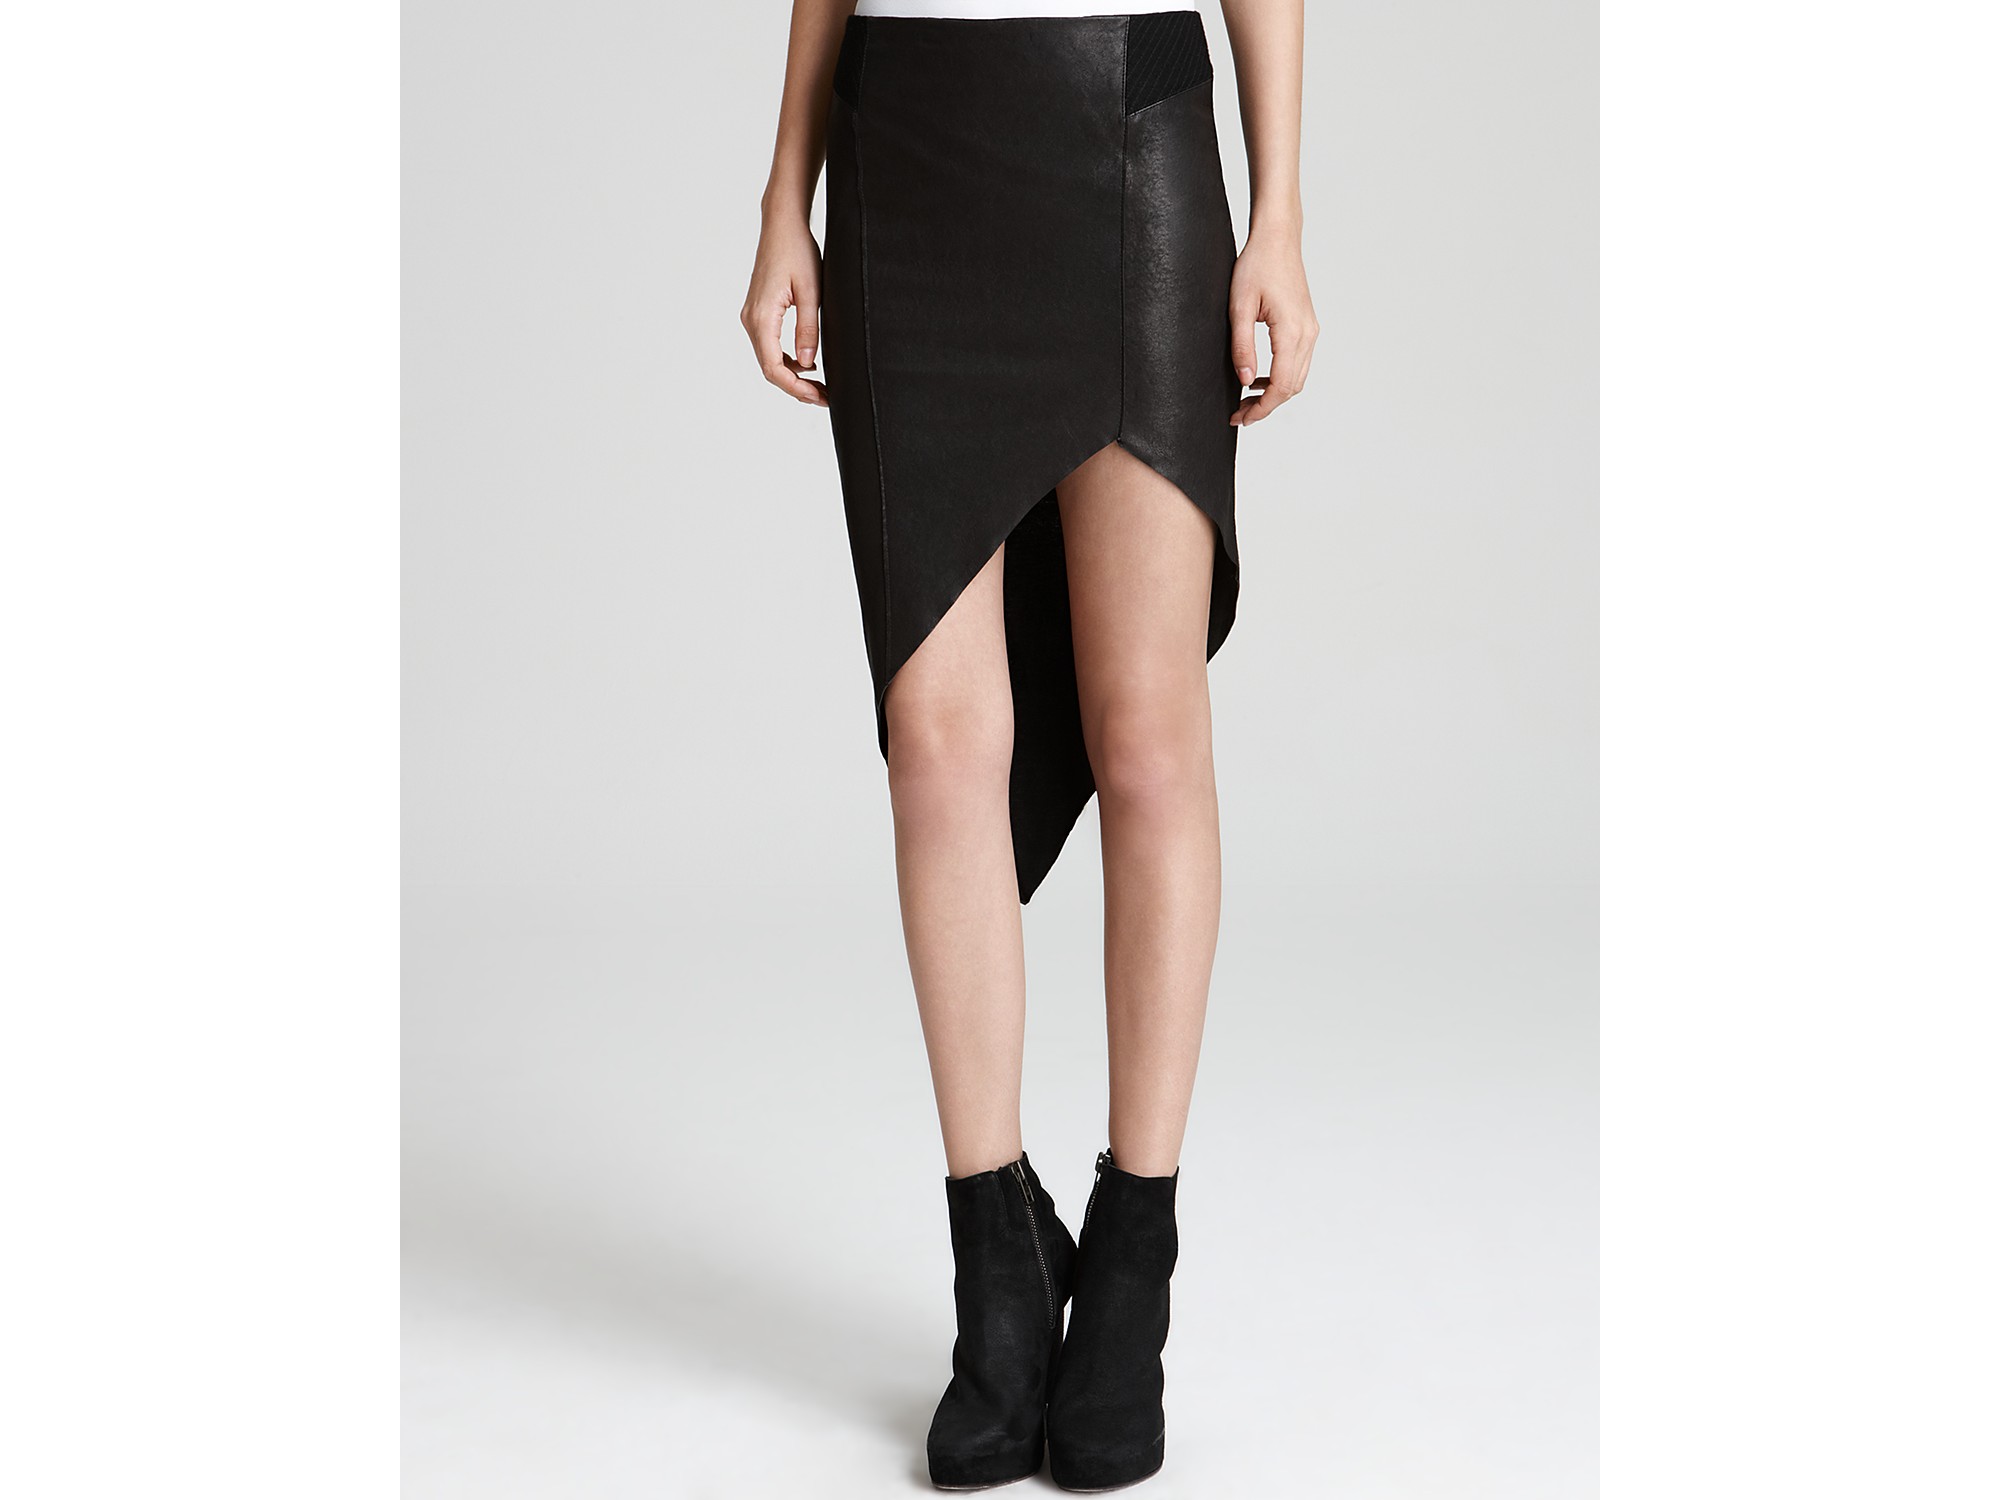 Helmut Lang Leather Skirt with Uneven Hem in Black - Lyst